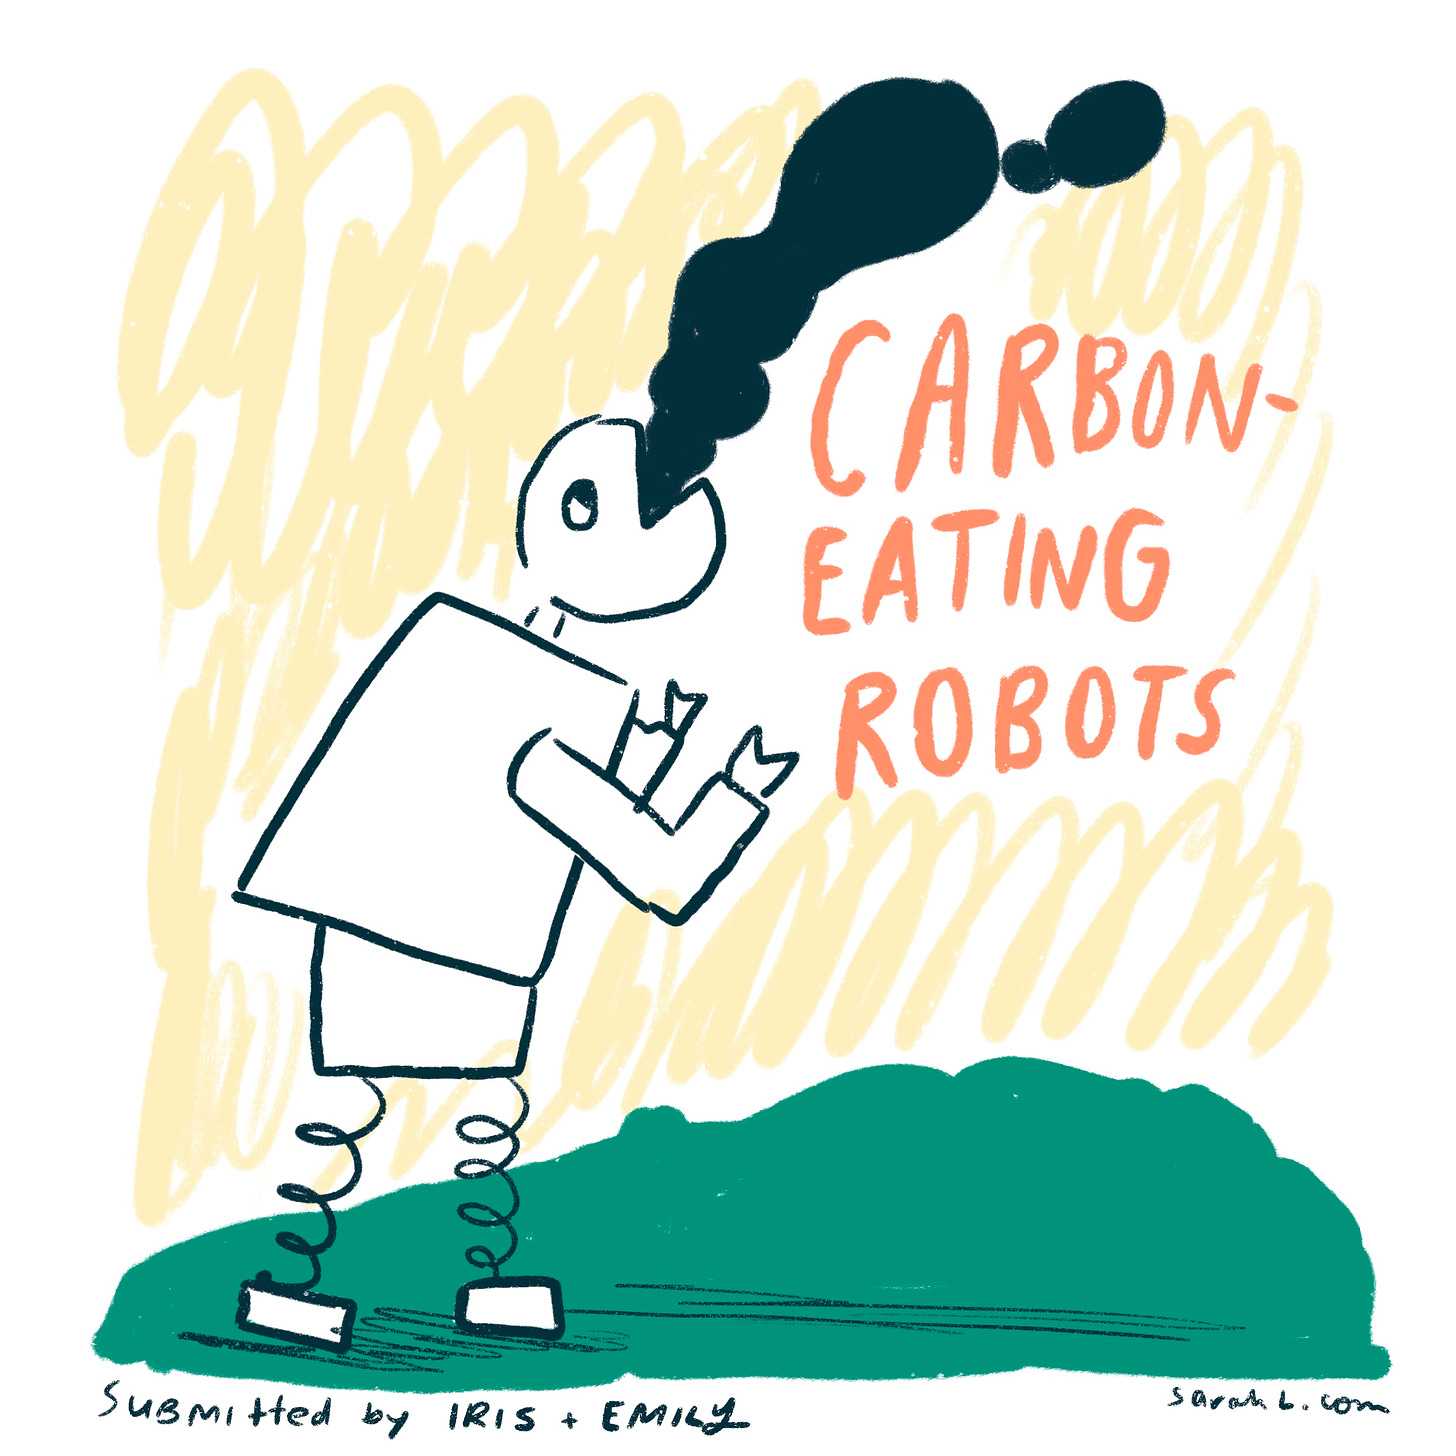 An illustration depicting "carbon-eating robots" shows a robot with springs for legs, a square body, rectangular arms, and a circular head with one eye. The robot's mouth is open and it is eating black smoke. The background is yellow and the ground is green. 